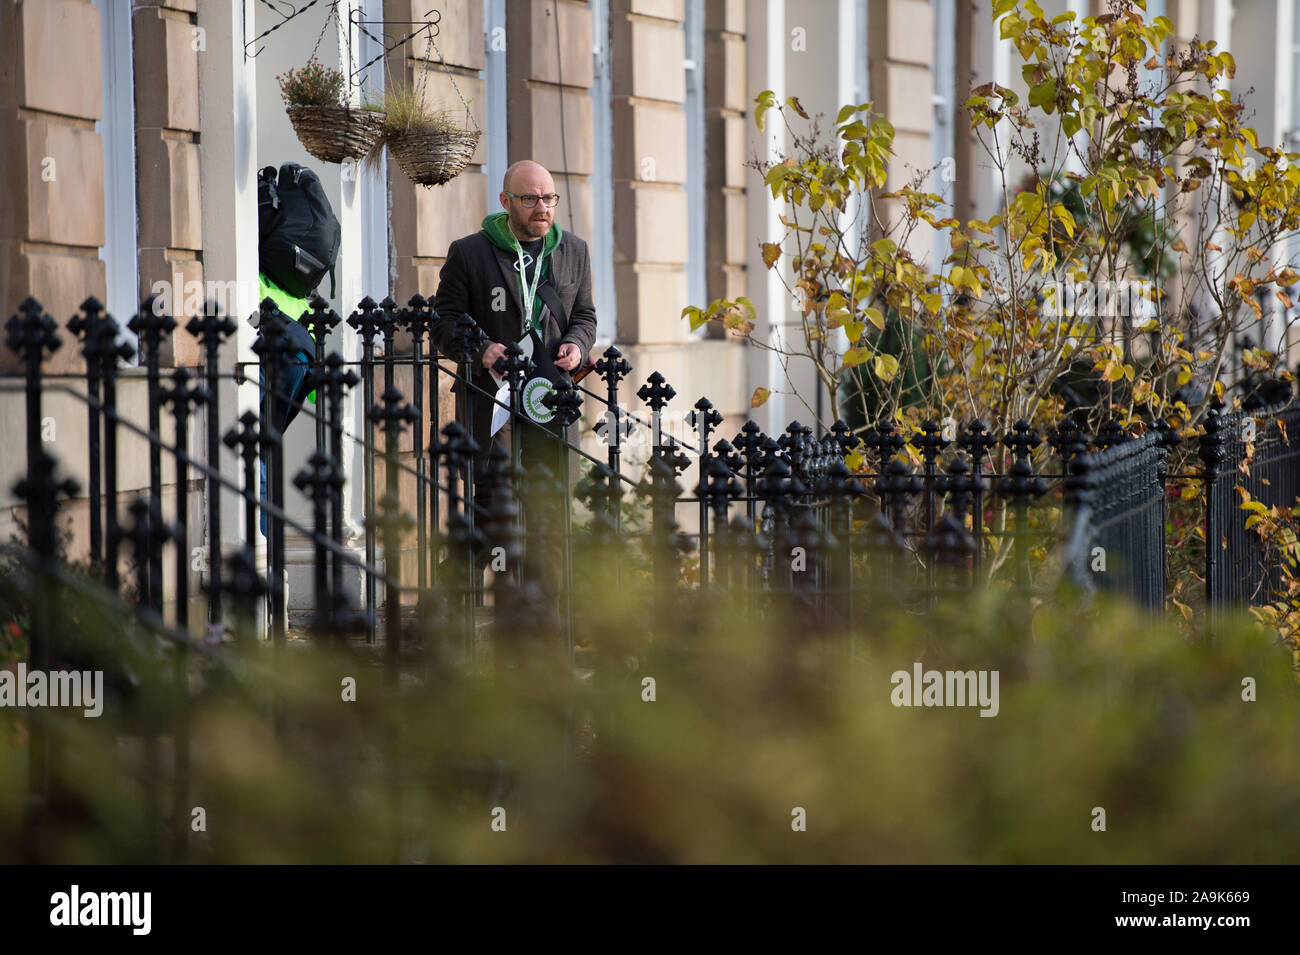 Glasgow, UK. 16th Nov, 2019. Pictured: Patrick Harvie MSP - Co Leader of the Scottish Green Party. Photo op for the Scottish Green Party on the General Election Campaign Trail. Patrick joins party activists to go round the neighbourhood door knocking and having conversations with the local residents. Credit: Colin Fisher/Alamy Live News Stock Photo